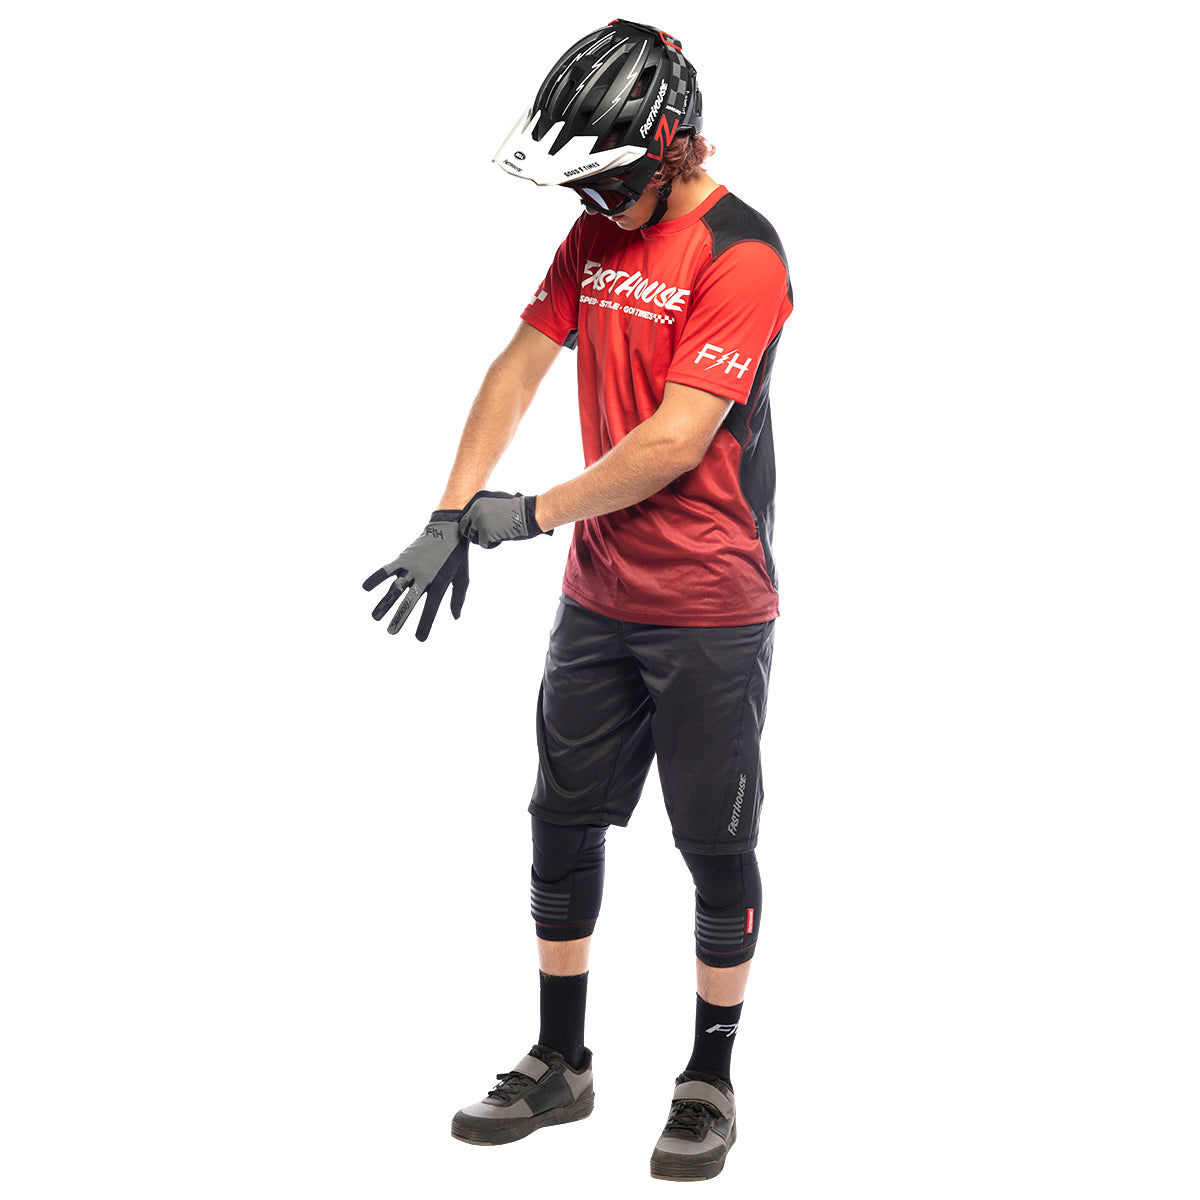 Alloy Slade SS Jersey - Red/Black